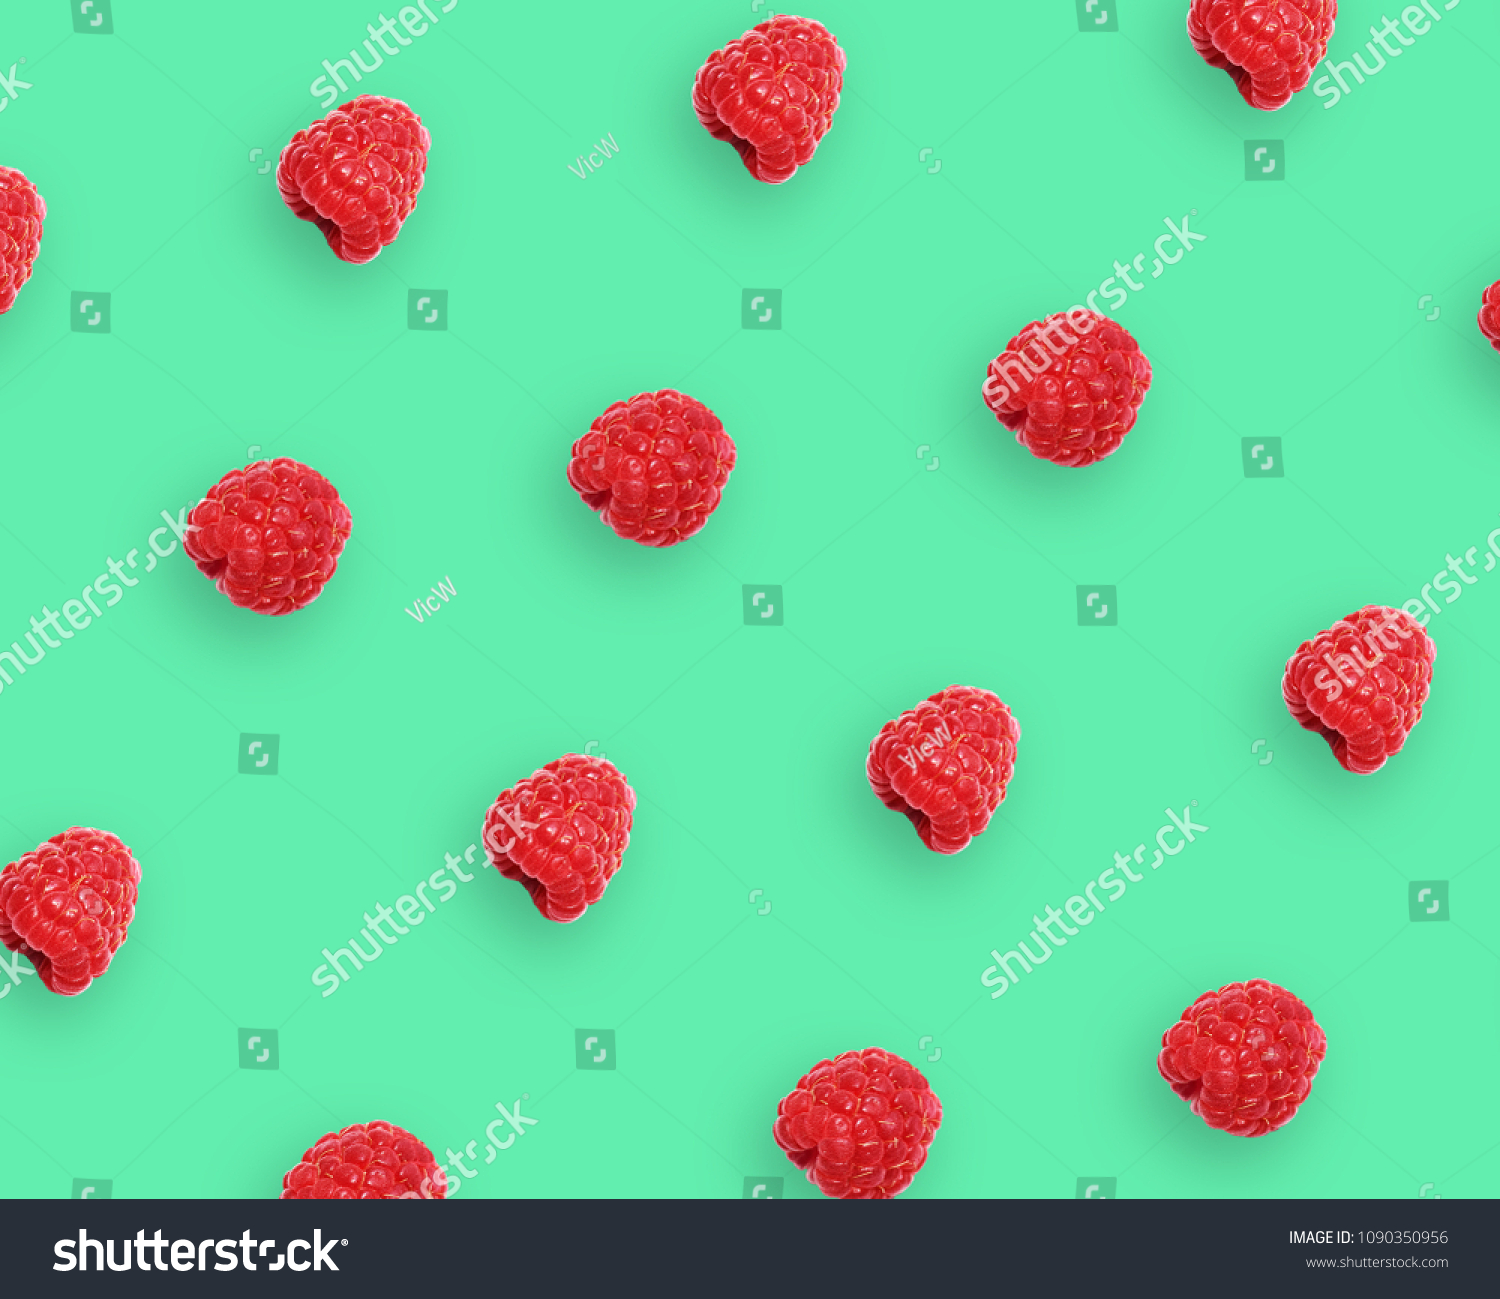 Raspberry berries pattern on vivid green, conceptual image, top view. Summer berry minimalistic flat lay background, bright colors. #1090350956